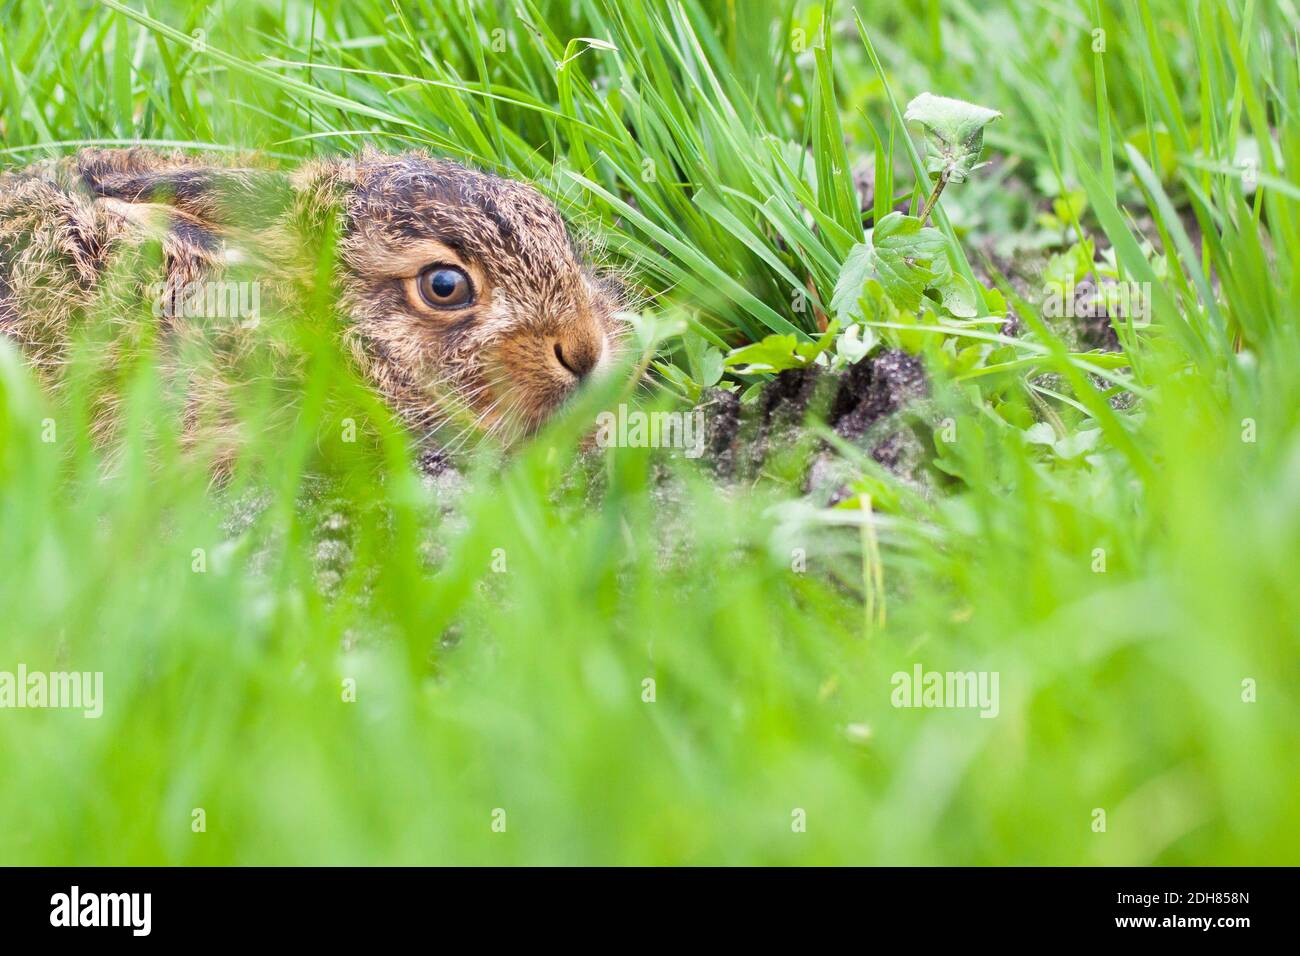 European hare, Brown hare (Lepus europaeus), little hare on grass, side view, Netherlands Stock Photo